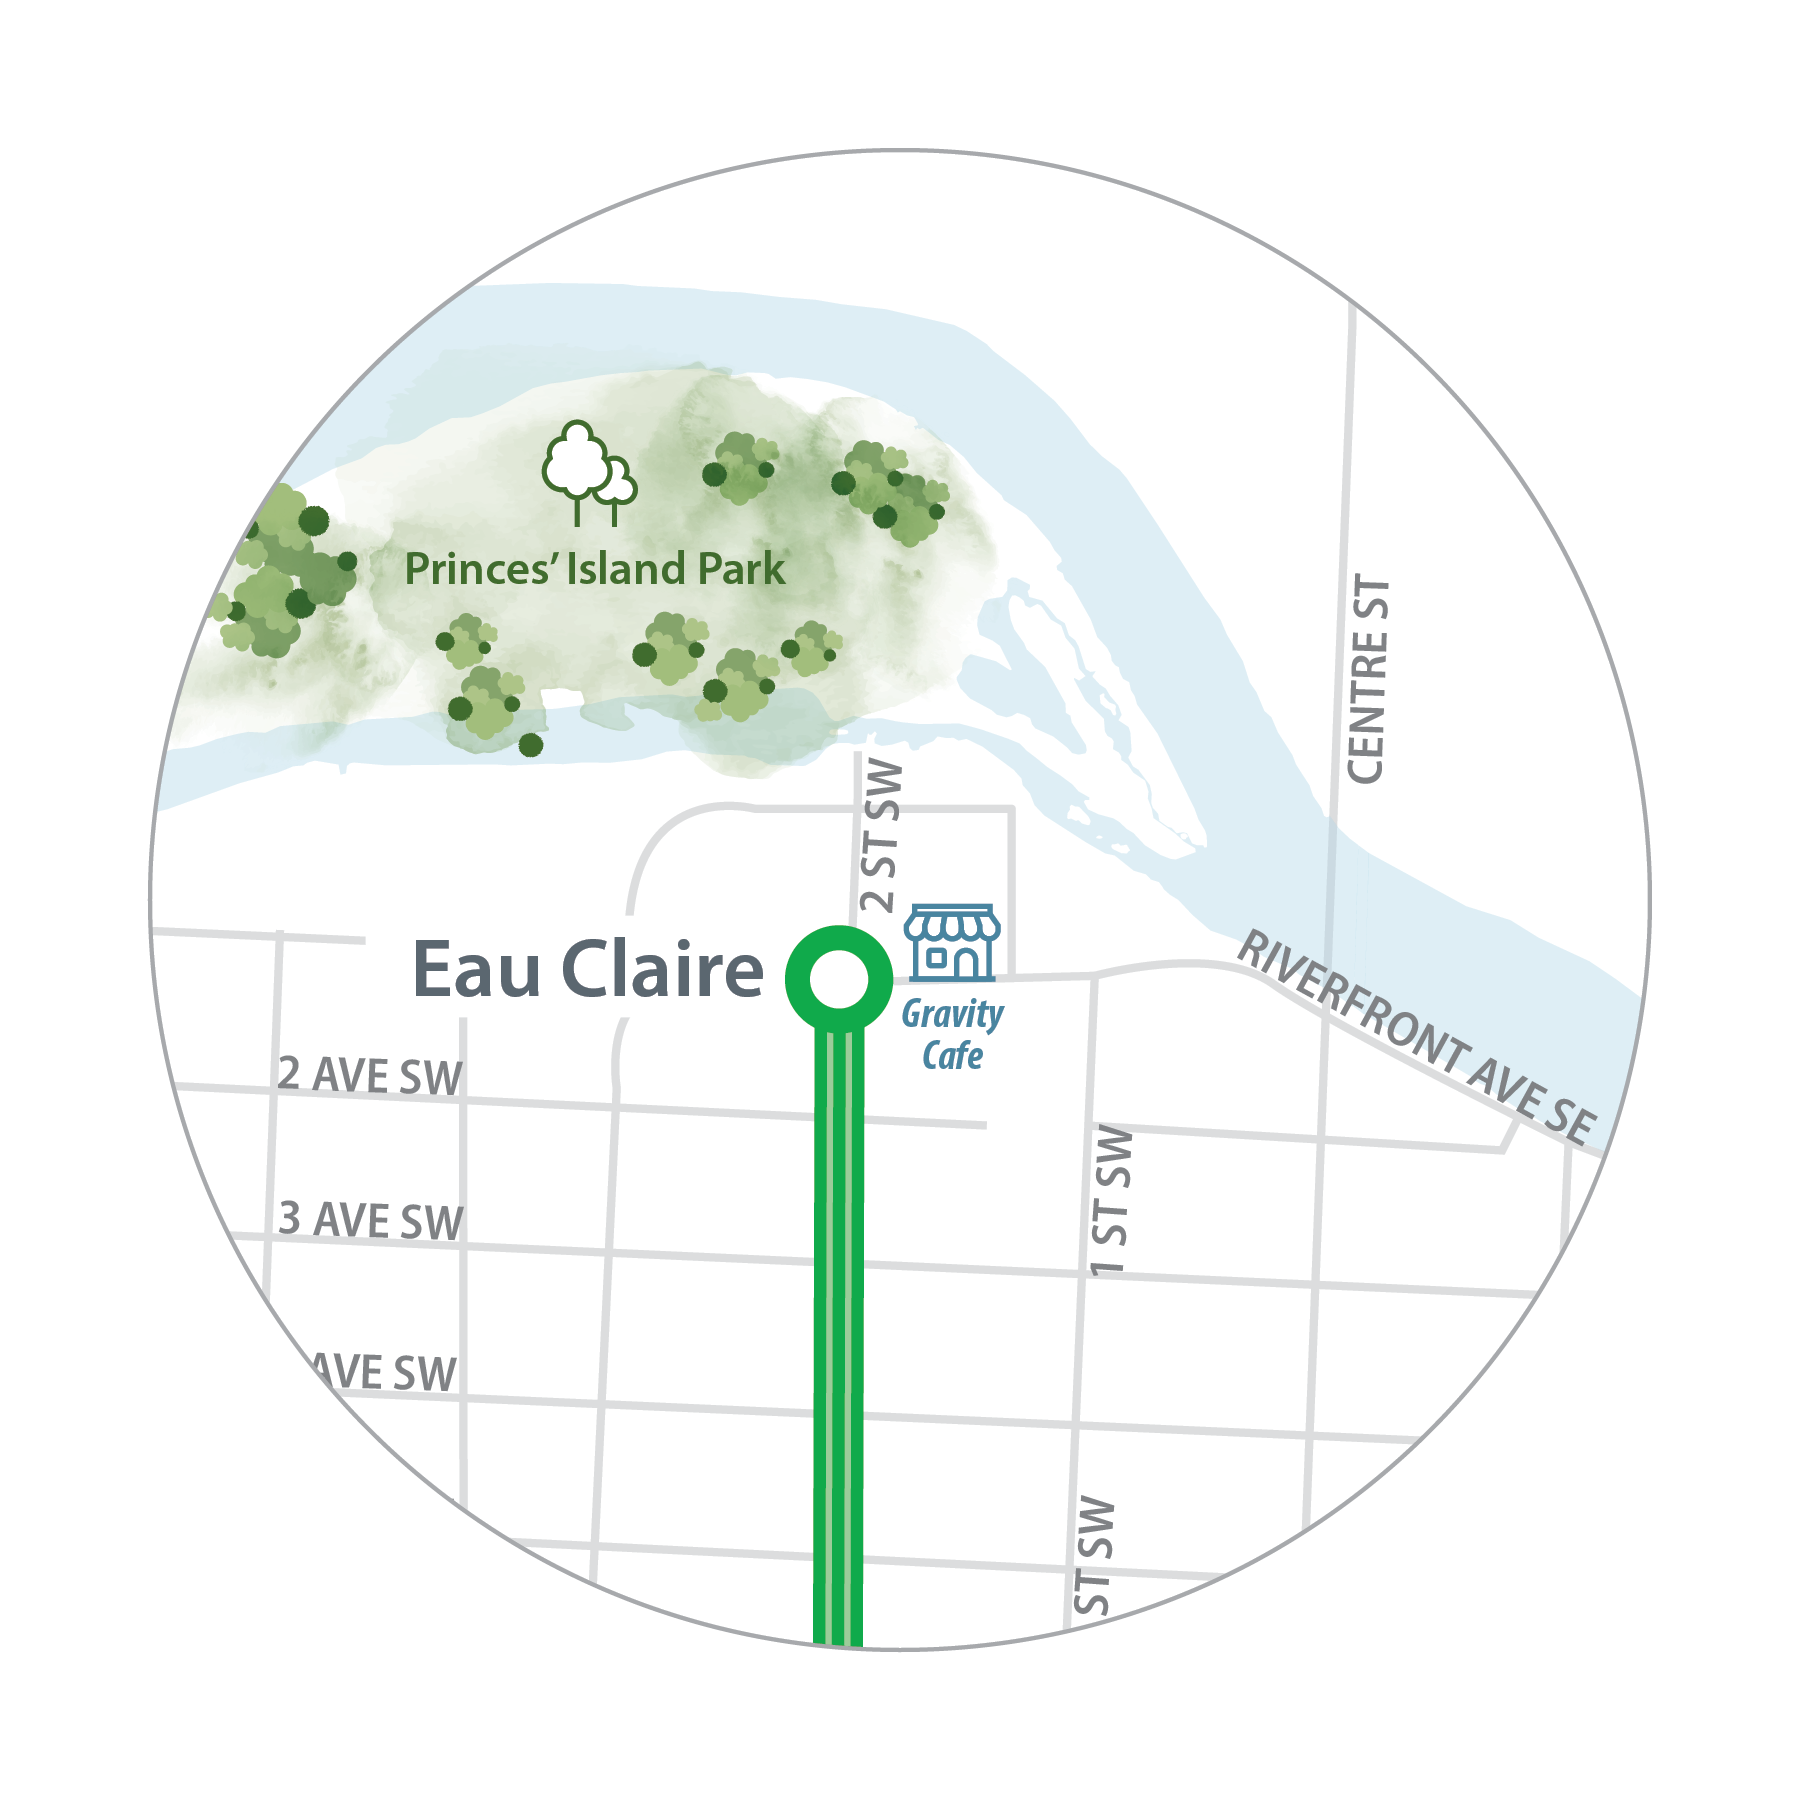 Map of Gravity Espresso & Wine Bar in relation to Eau Claire Station.